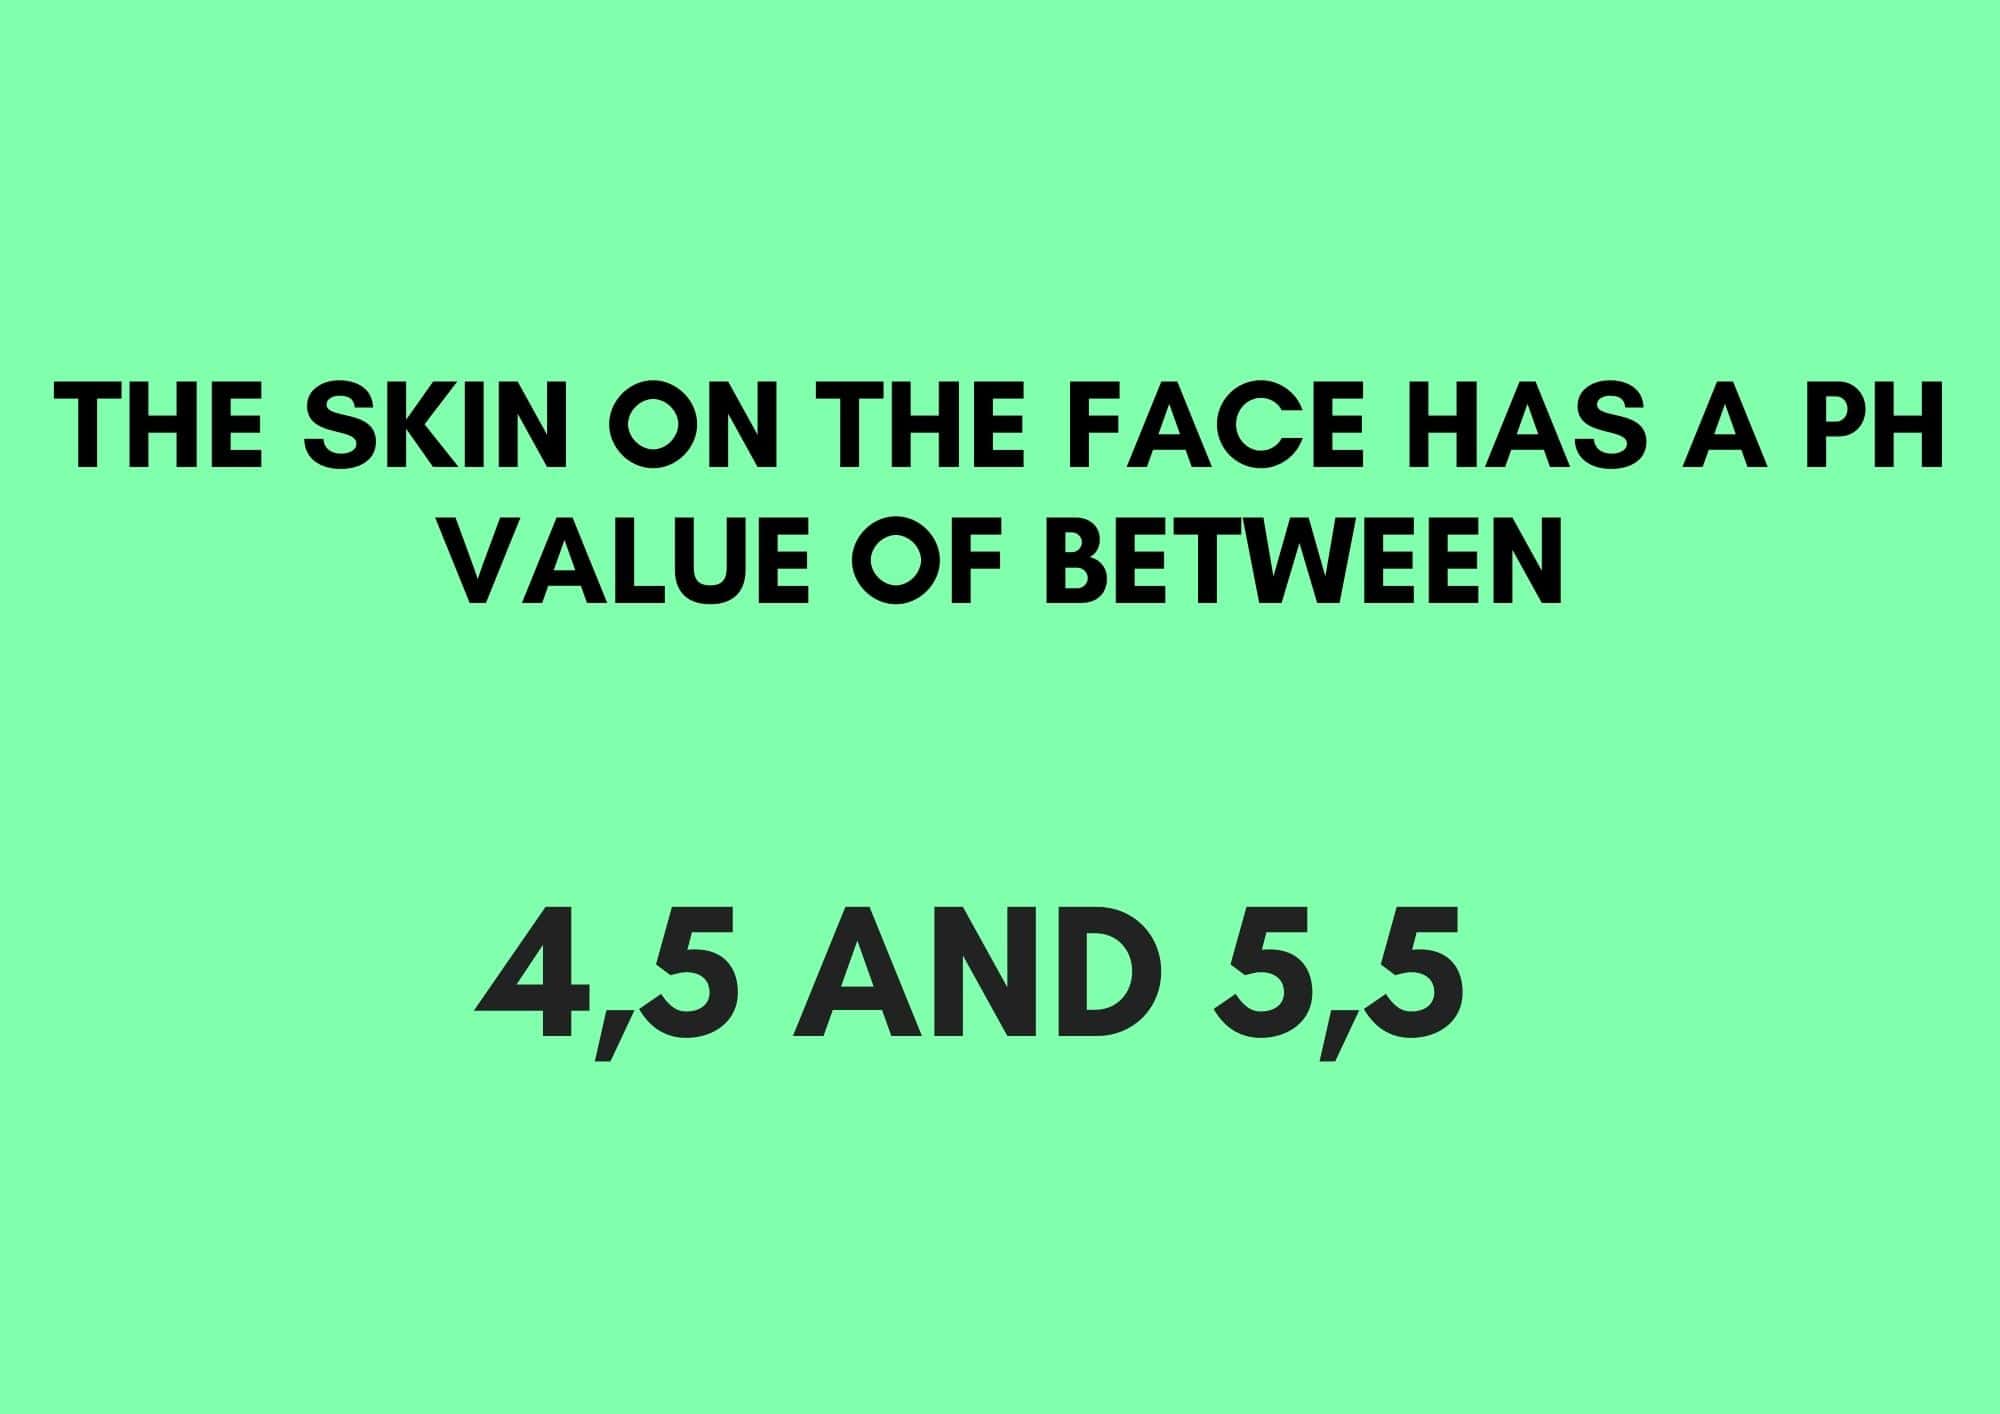 signature about the pH of the face skin